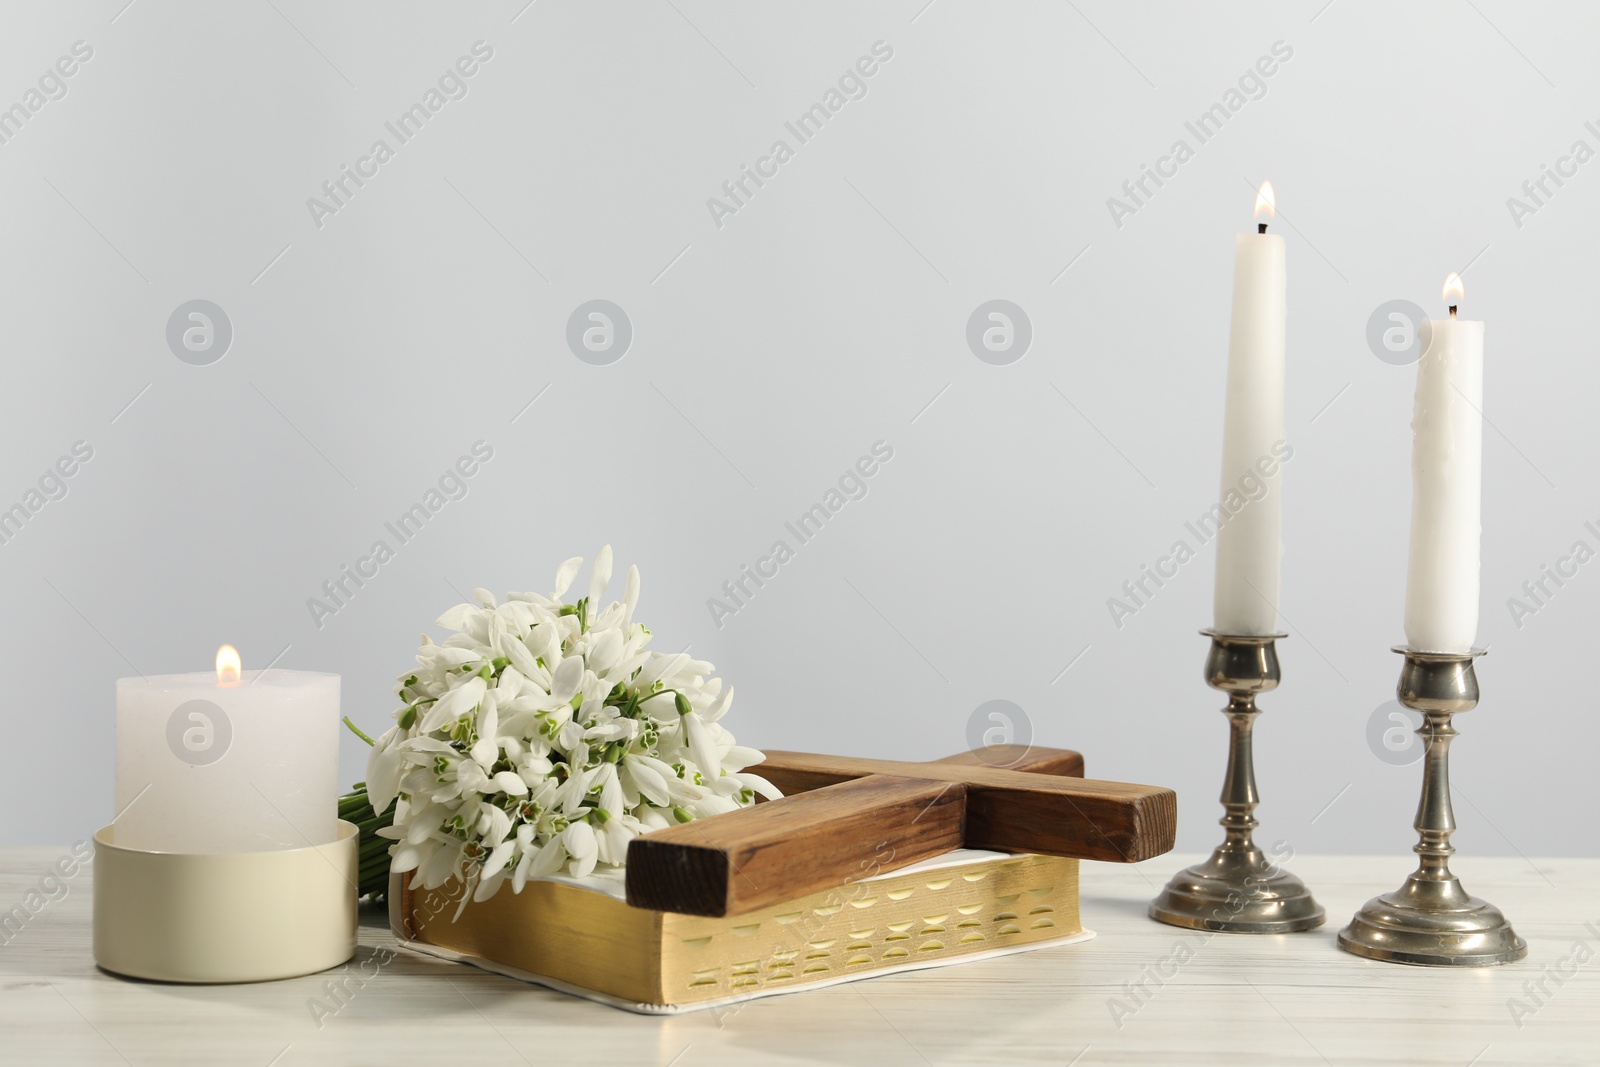 Photo of Burning church candles, wooden cross, Bible and flowers on white table